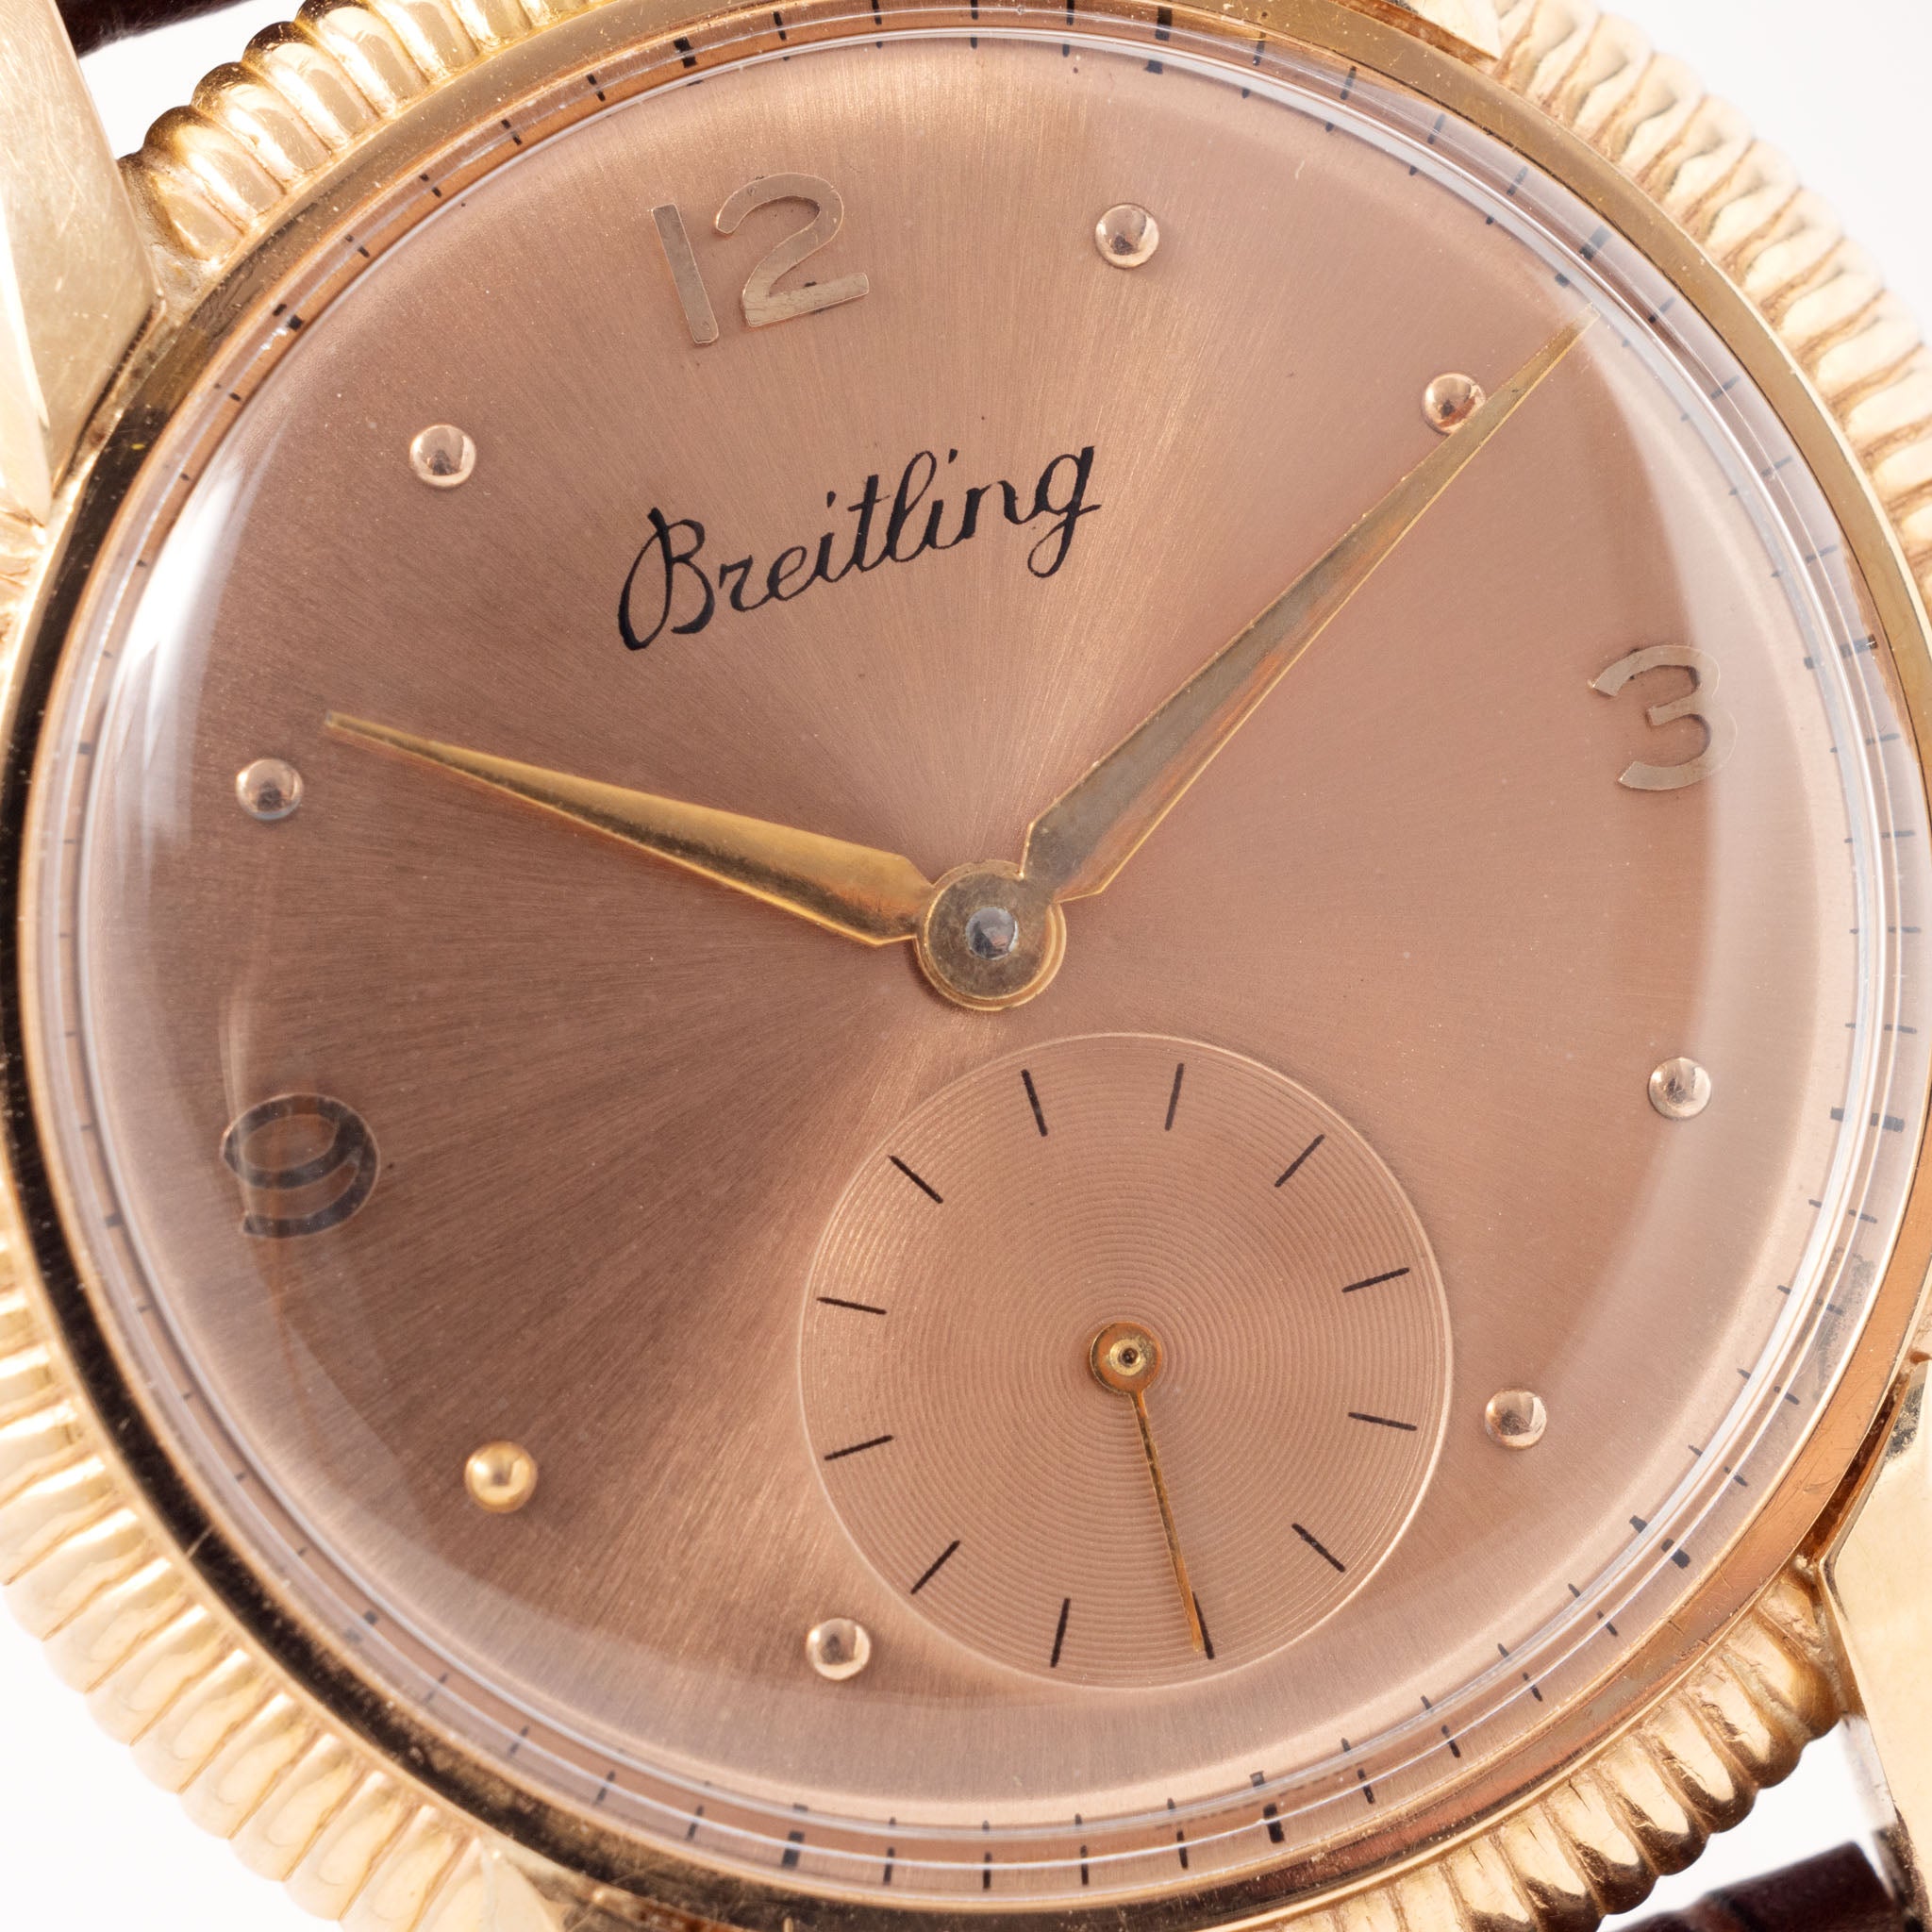 Breitling Rose Gold Dress Watch Salmon Dial Ref 177